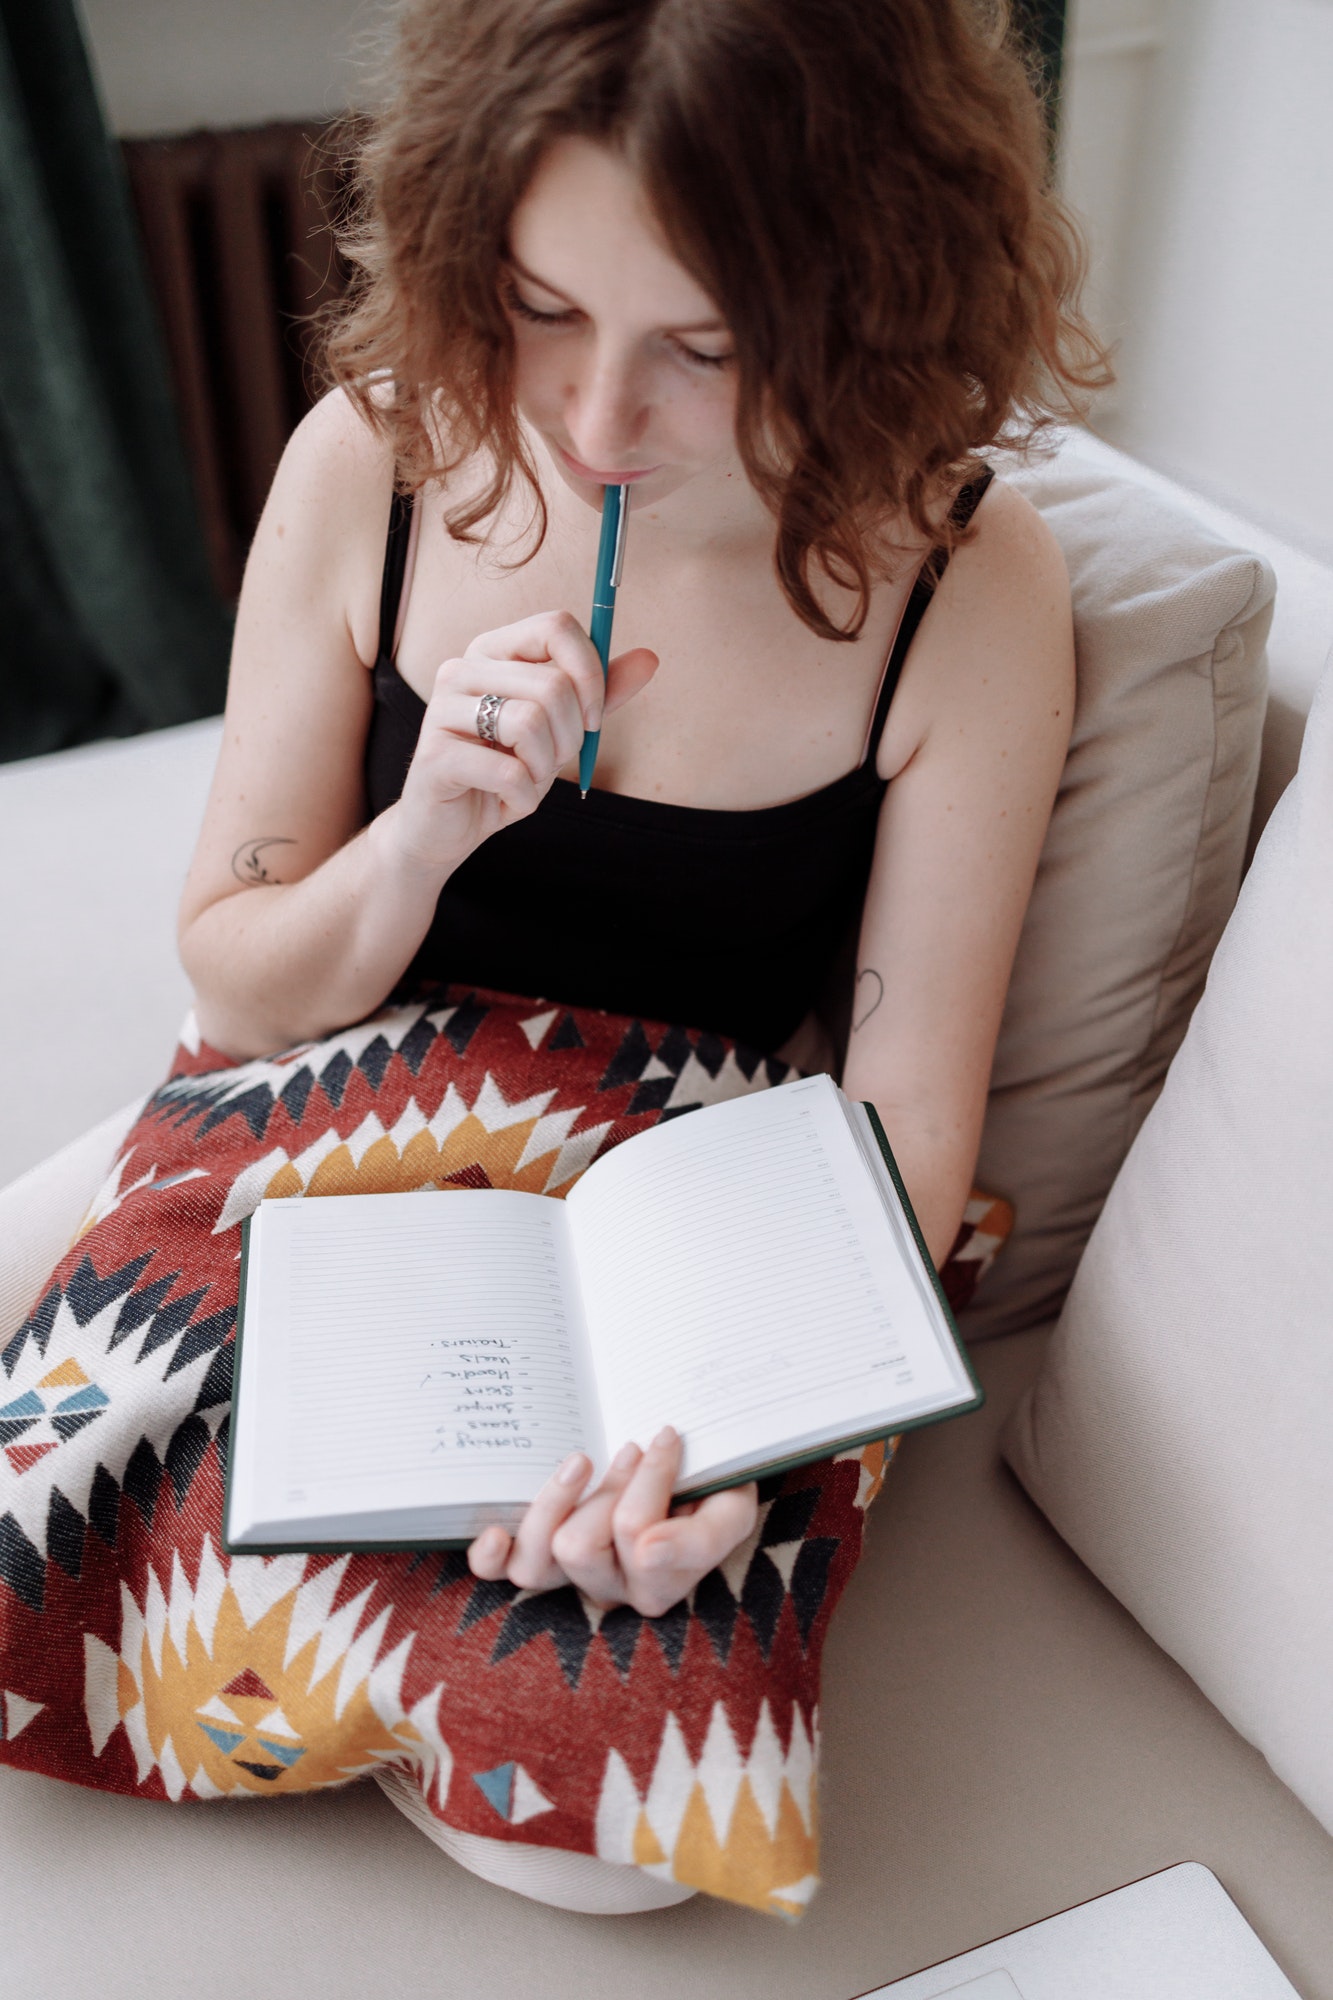 Woman Holding a Pen and a Notebook